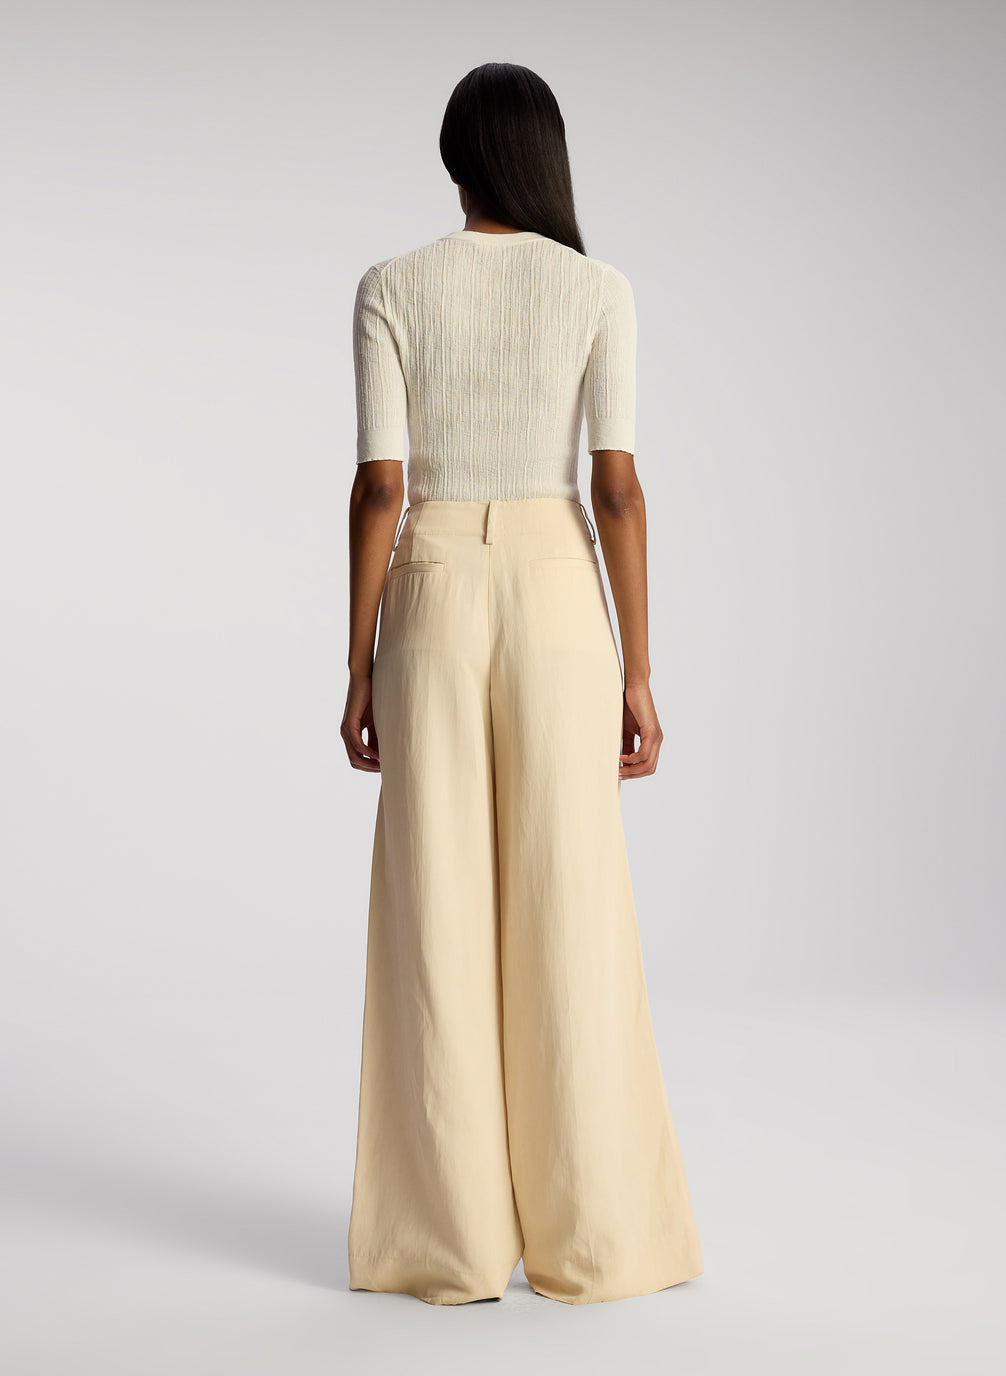 back view of woman wearing white top and cream wide leg pants